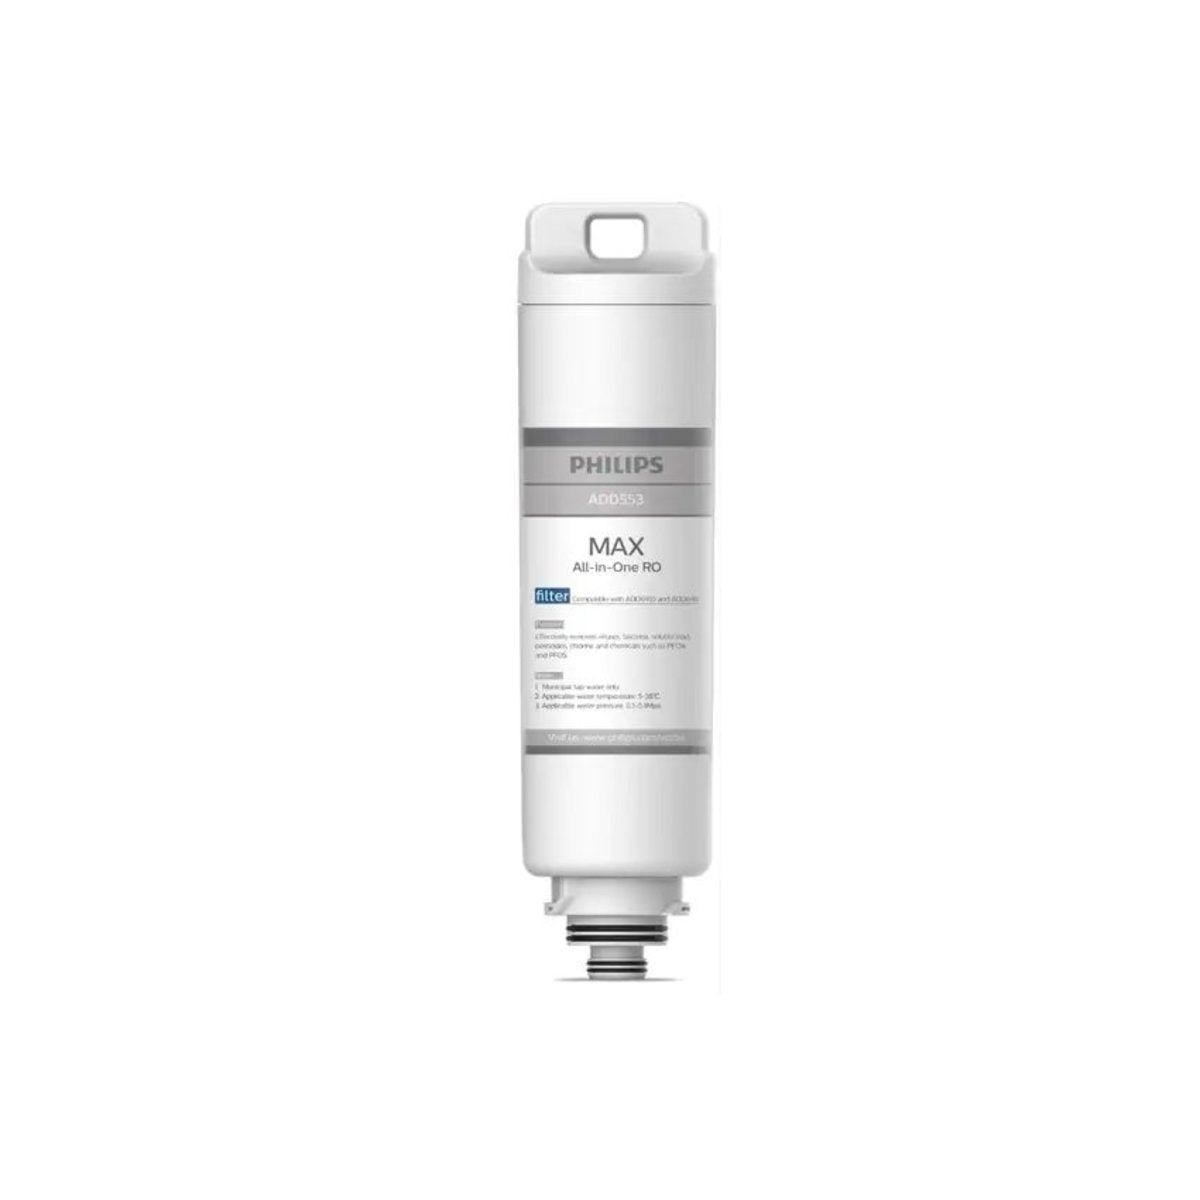 Philips-ADD553 RO pure water dispenser water filter element (applicable to ADD6911)